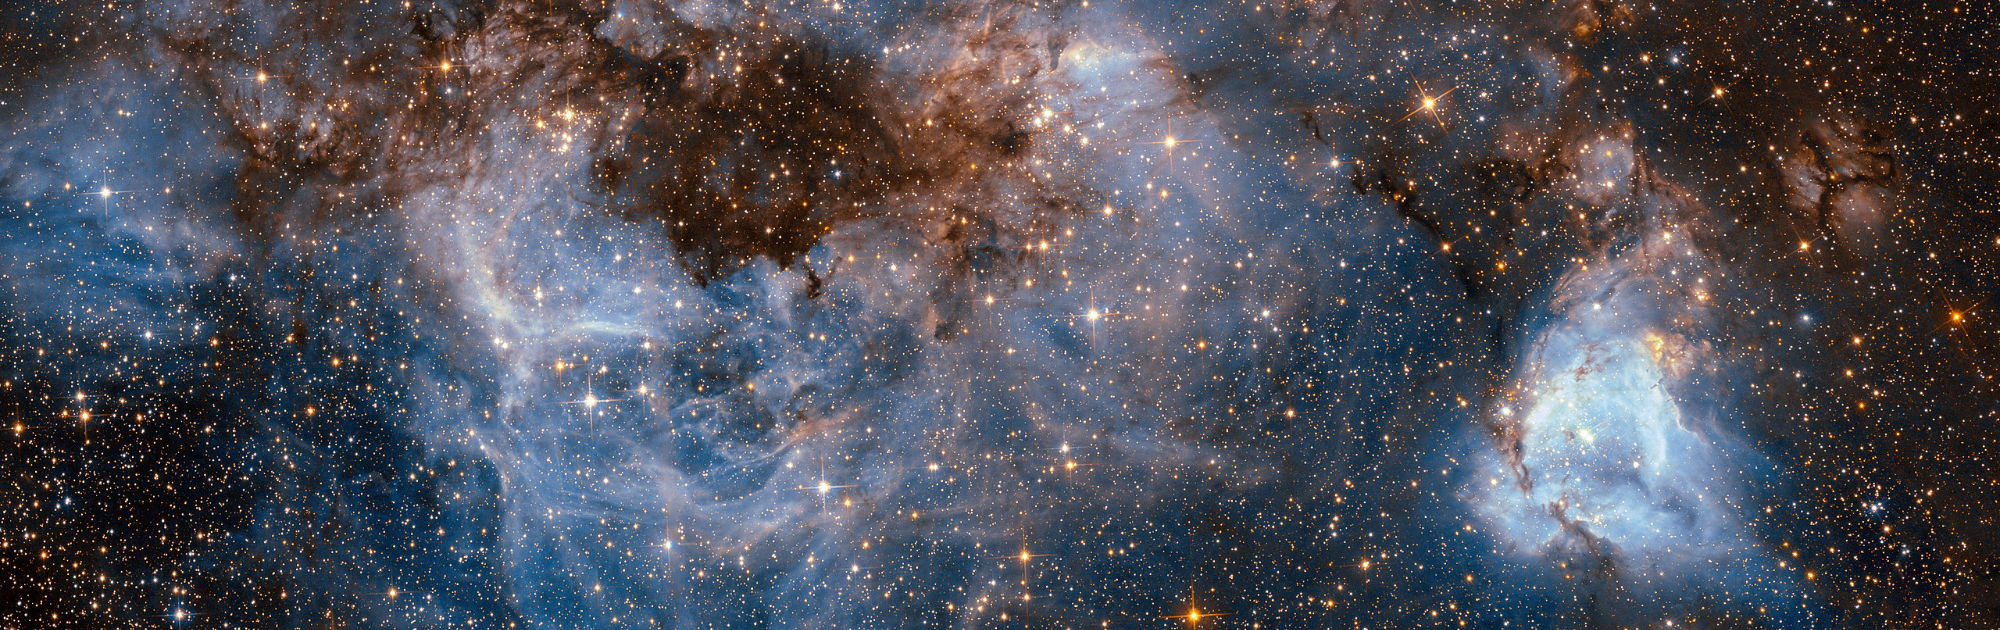 Hubble peers into the storm